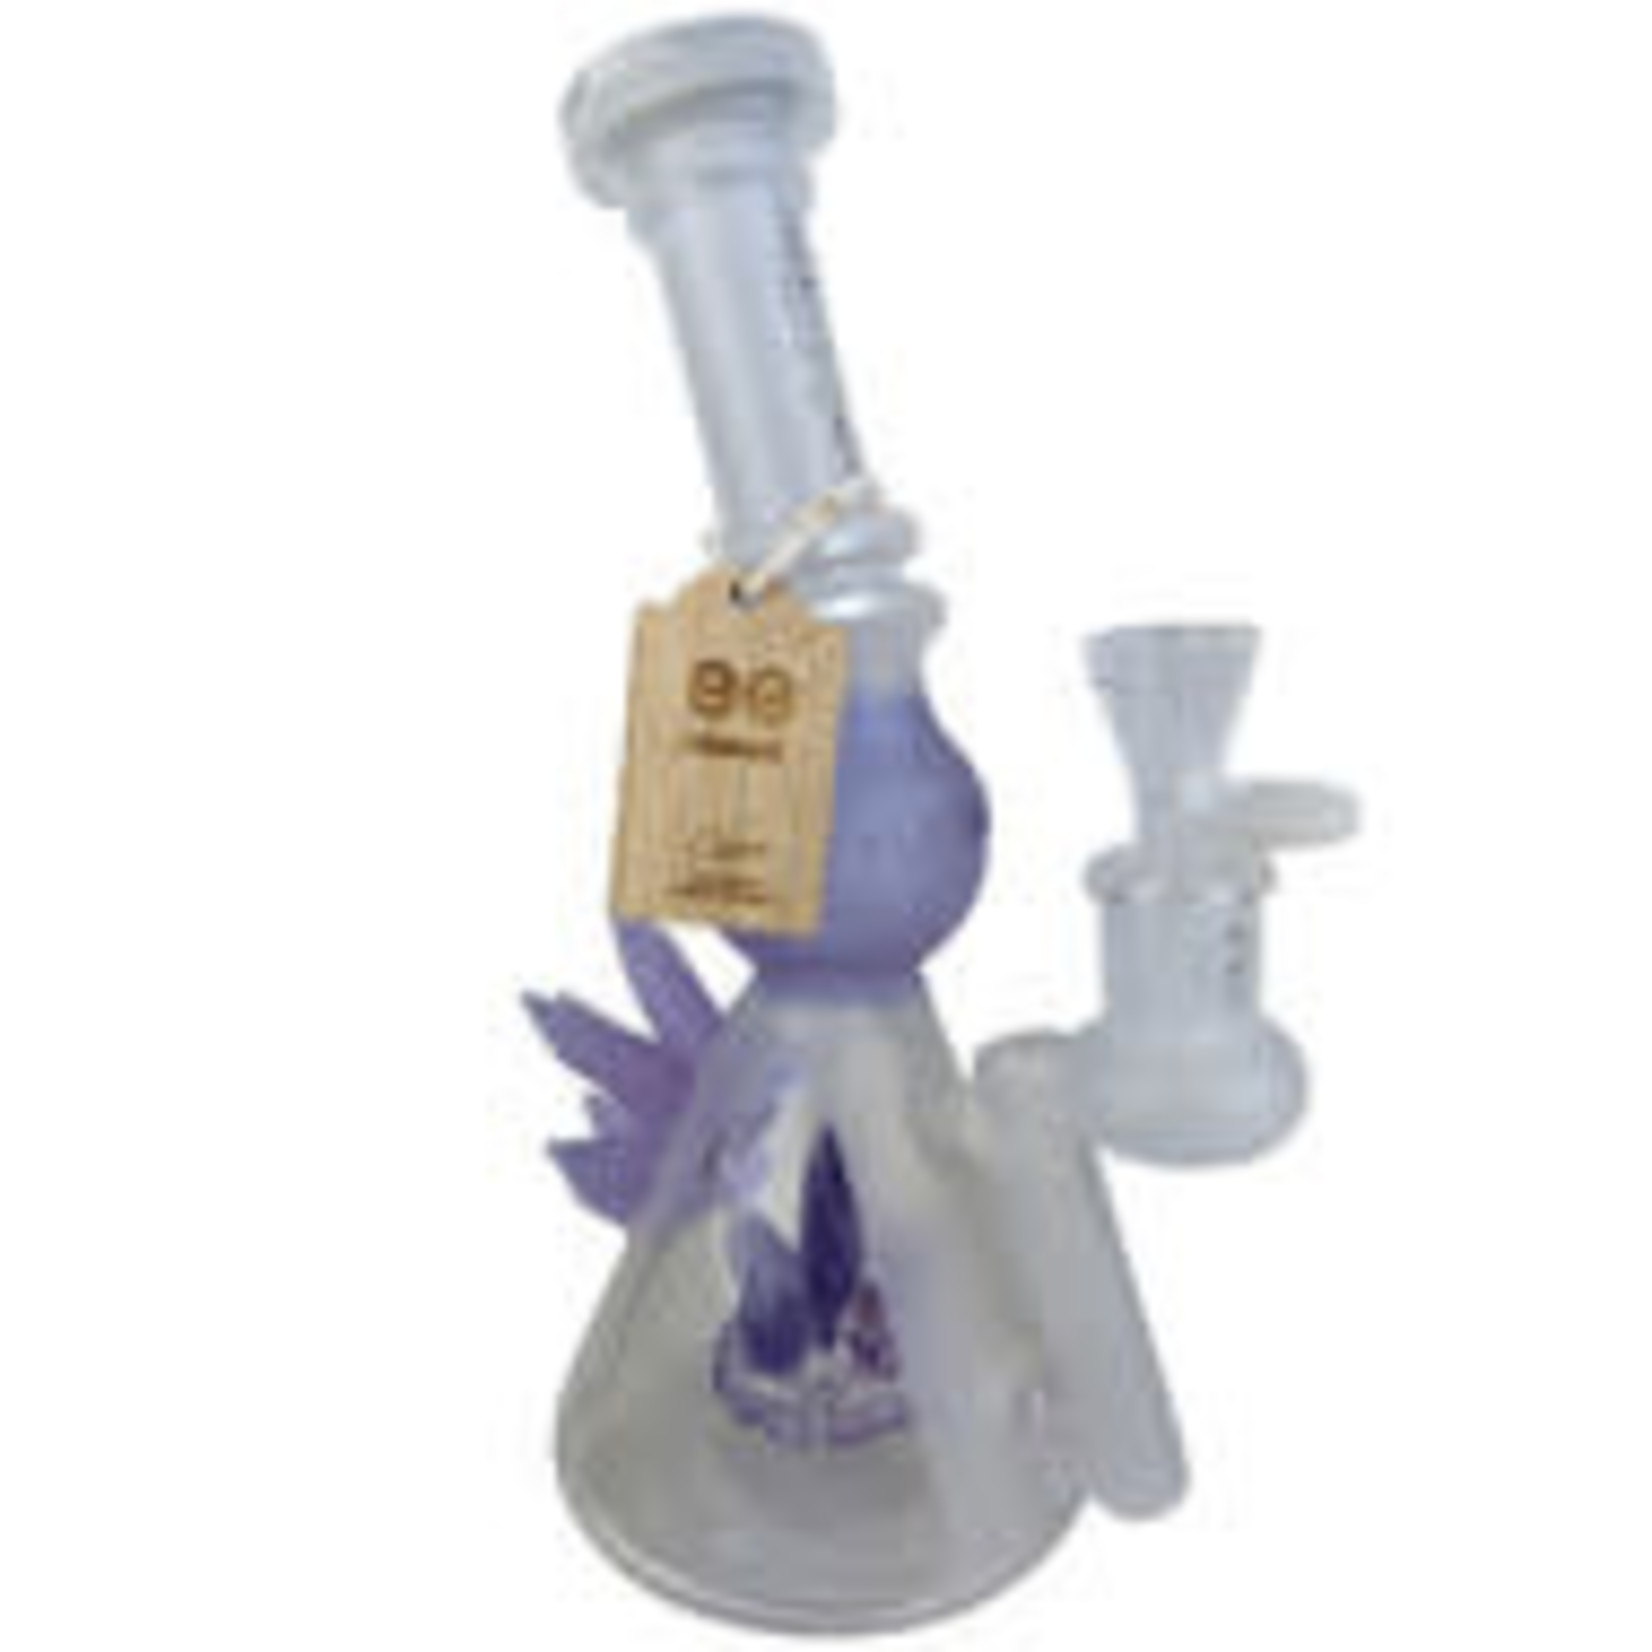 Cheech Glass Cheech Glass - Crystal Takeover Rig - with 14M Bowl